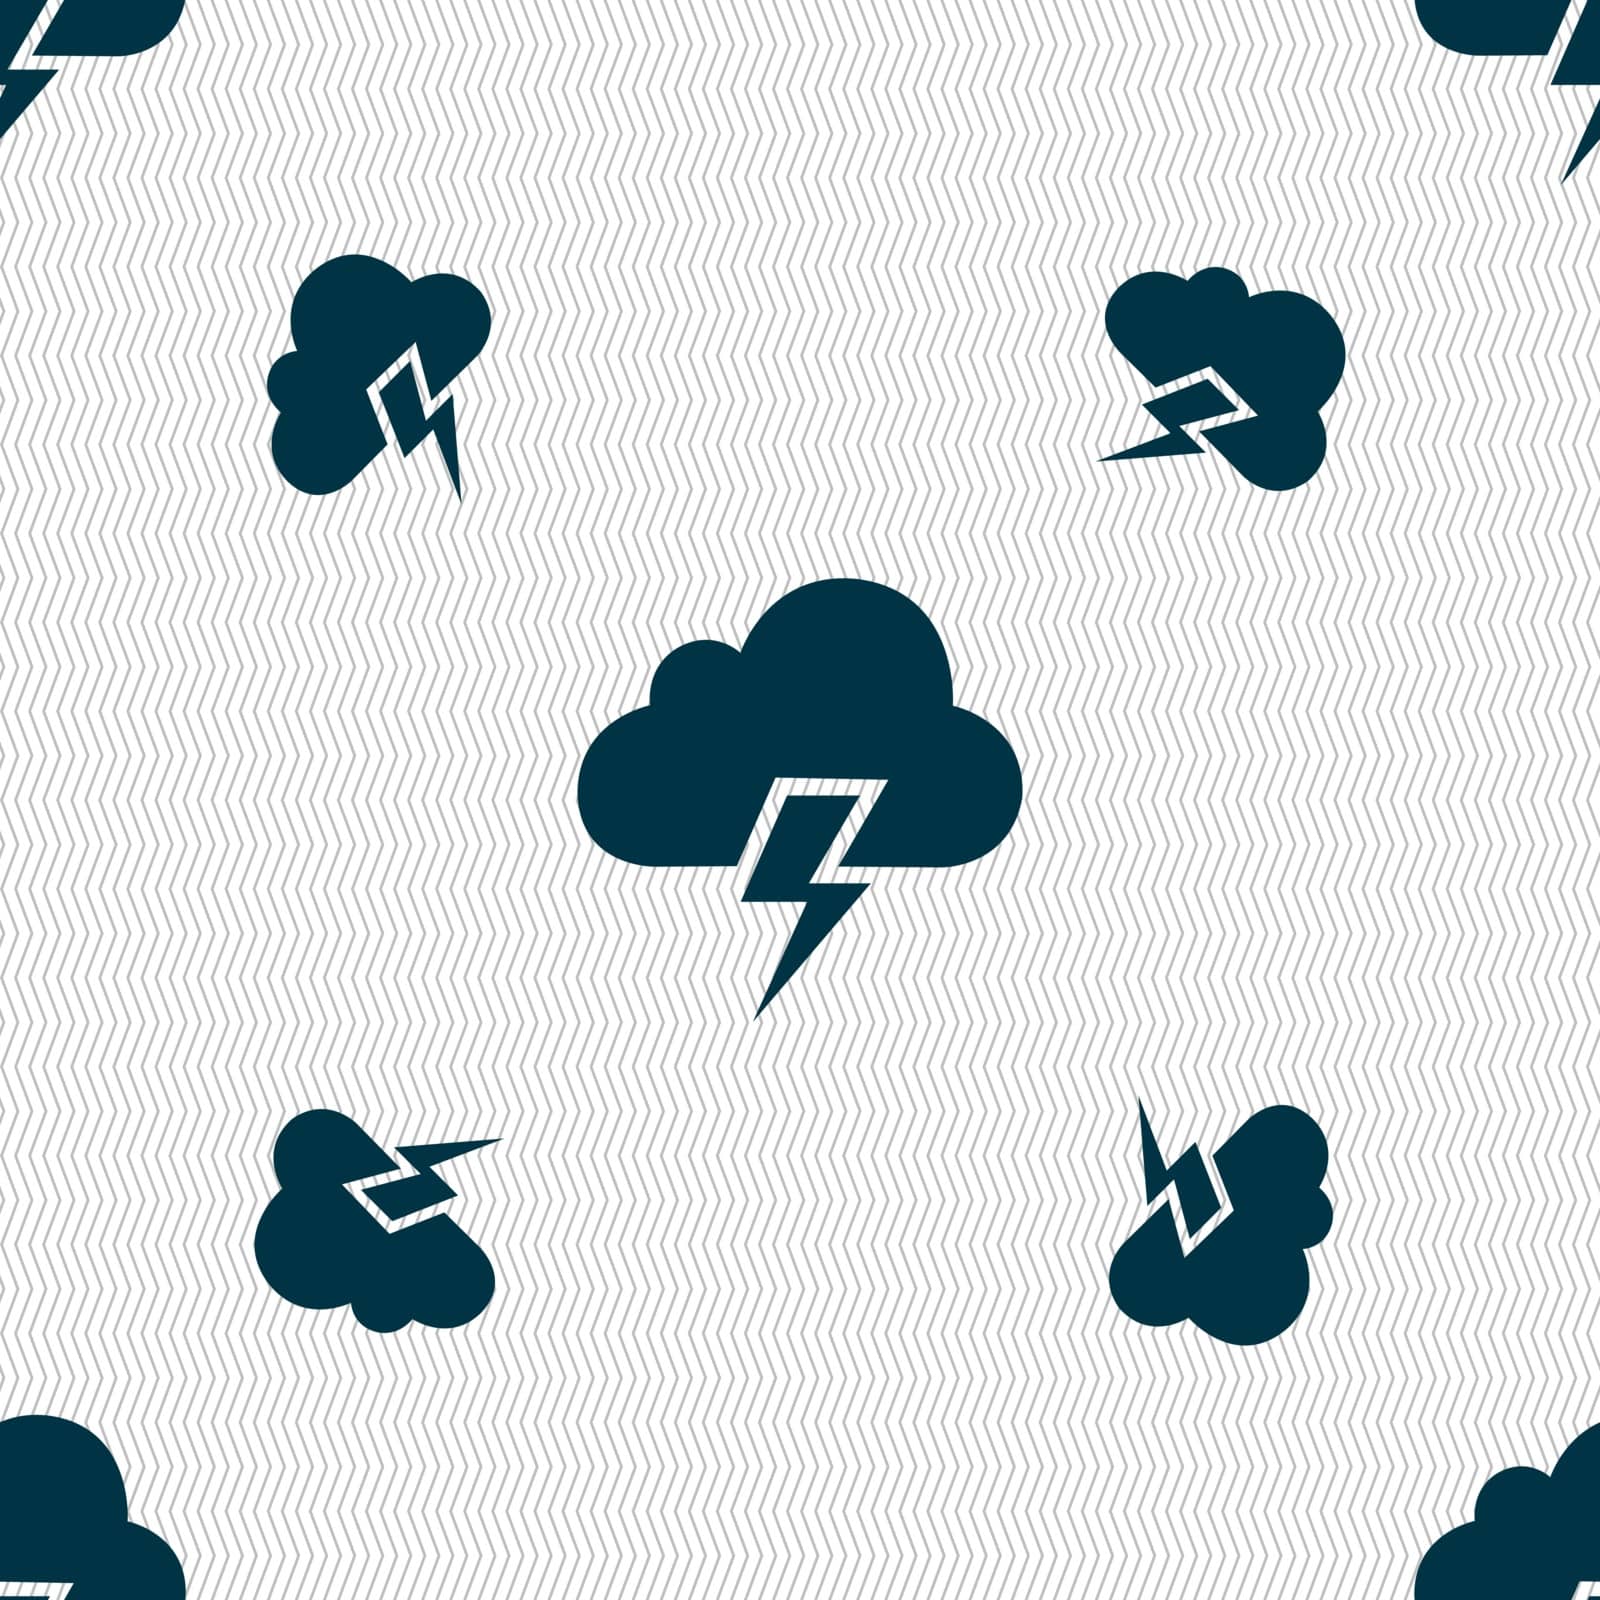 Heavy thunderstorm icon sign. Seamless pattern with geometric texture. Vector illustration